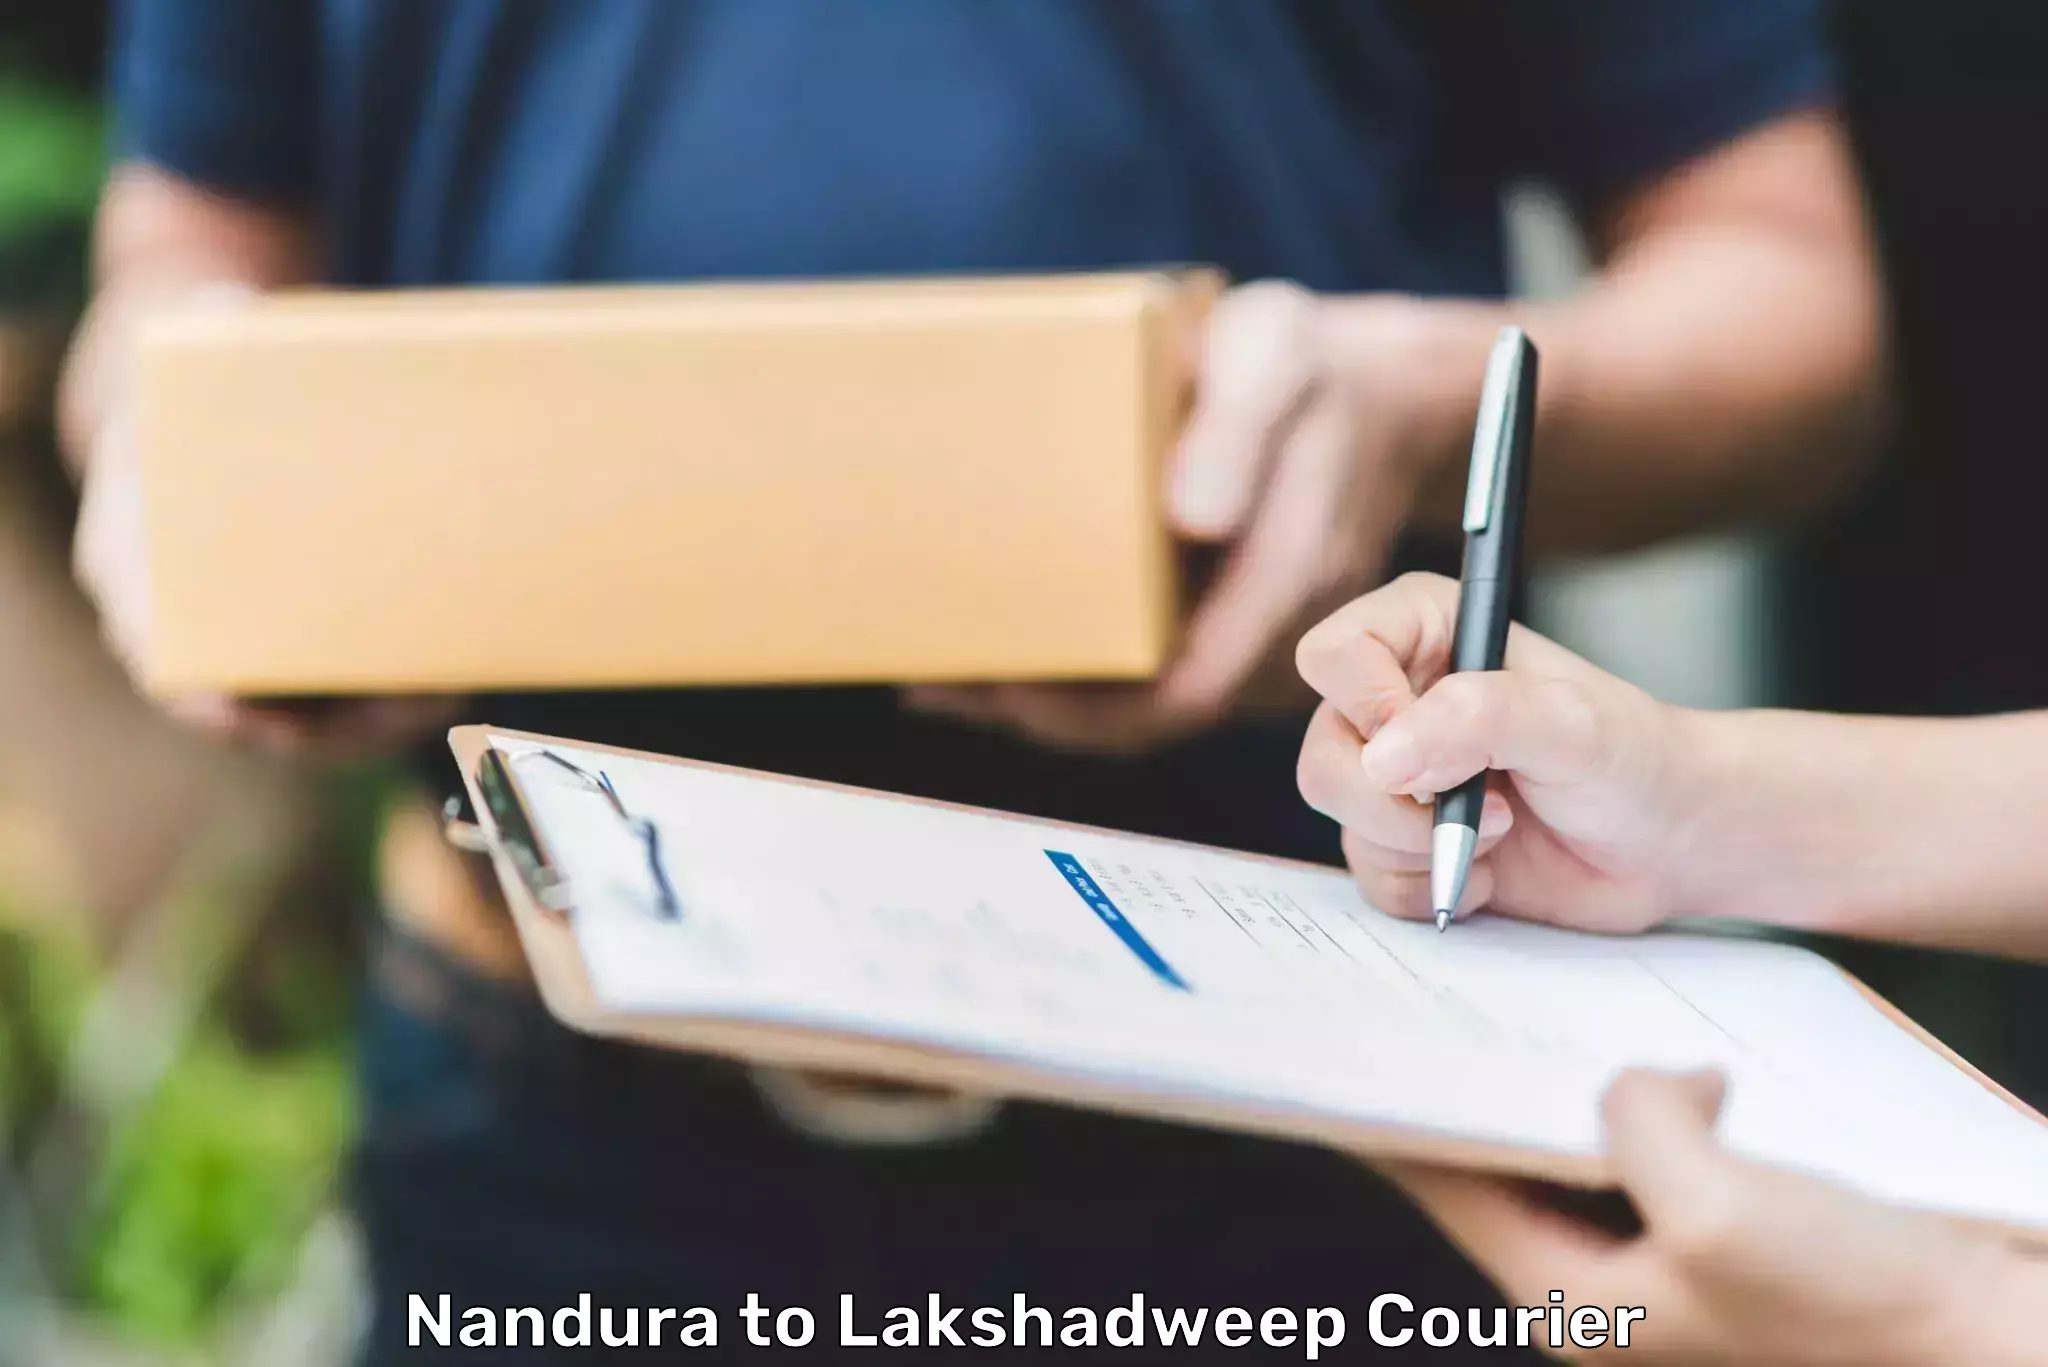 Reliable courier service Nandura to Lakshadweep